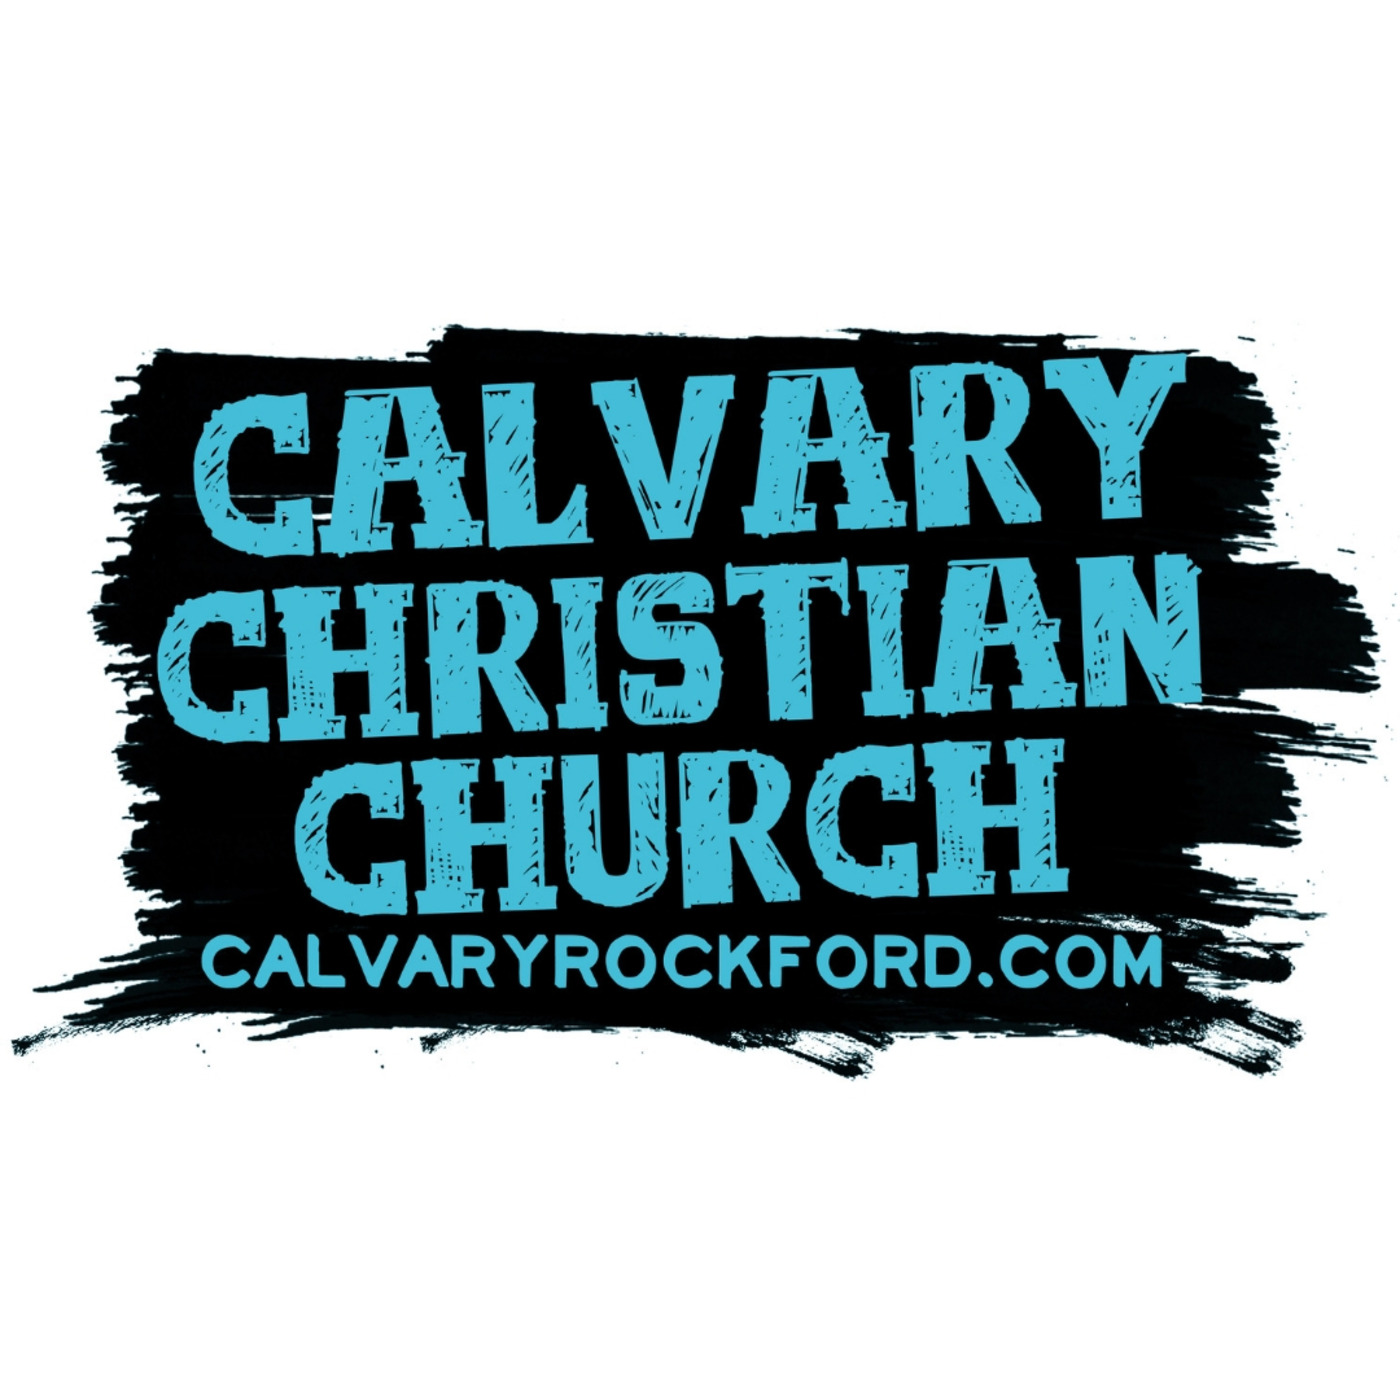 Messages from Calvary